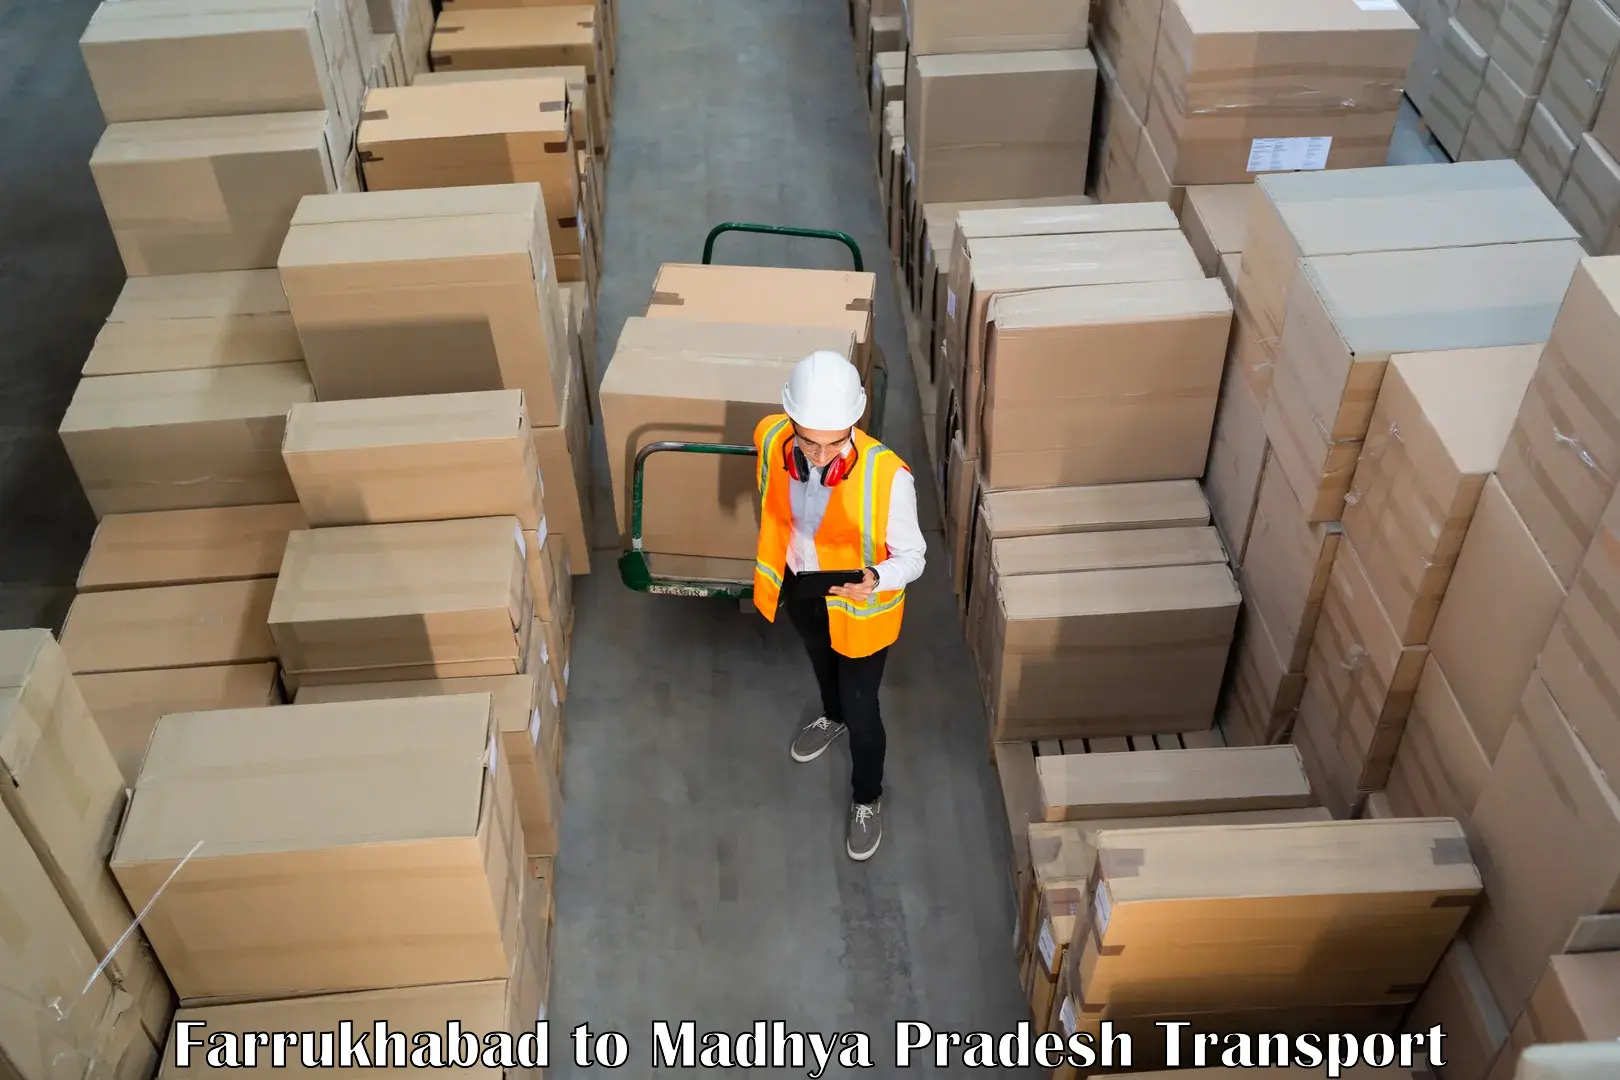 Truck transport companies in India Farrukhabad to Kukshi